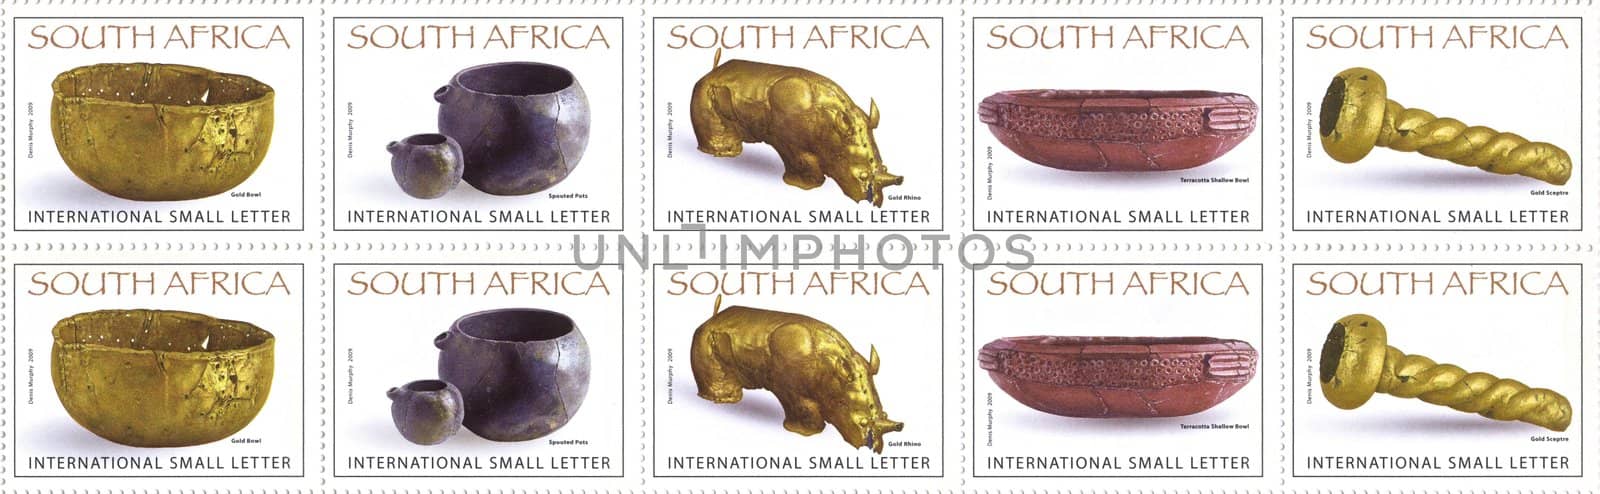 South Africa Stamps by instinia